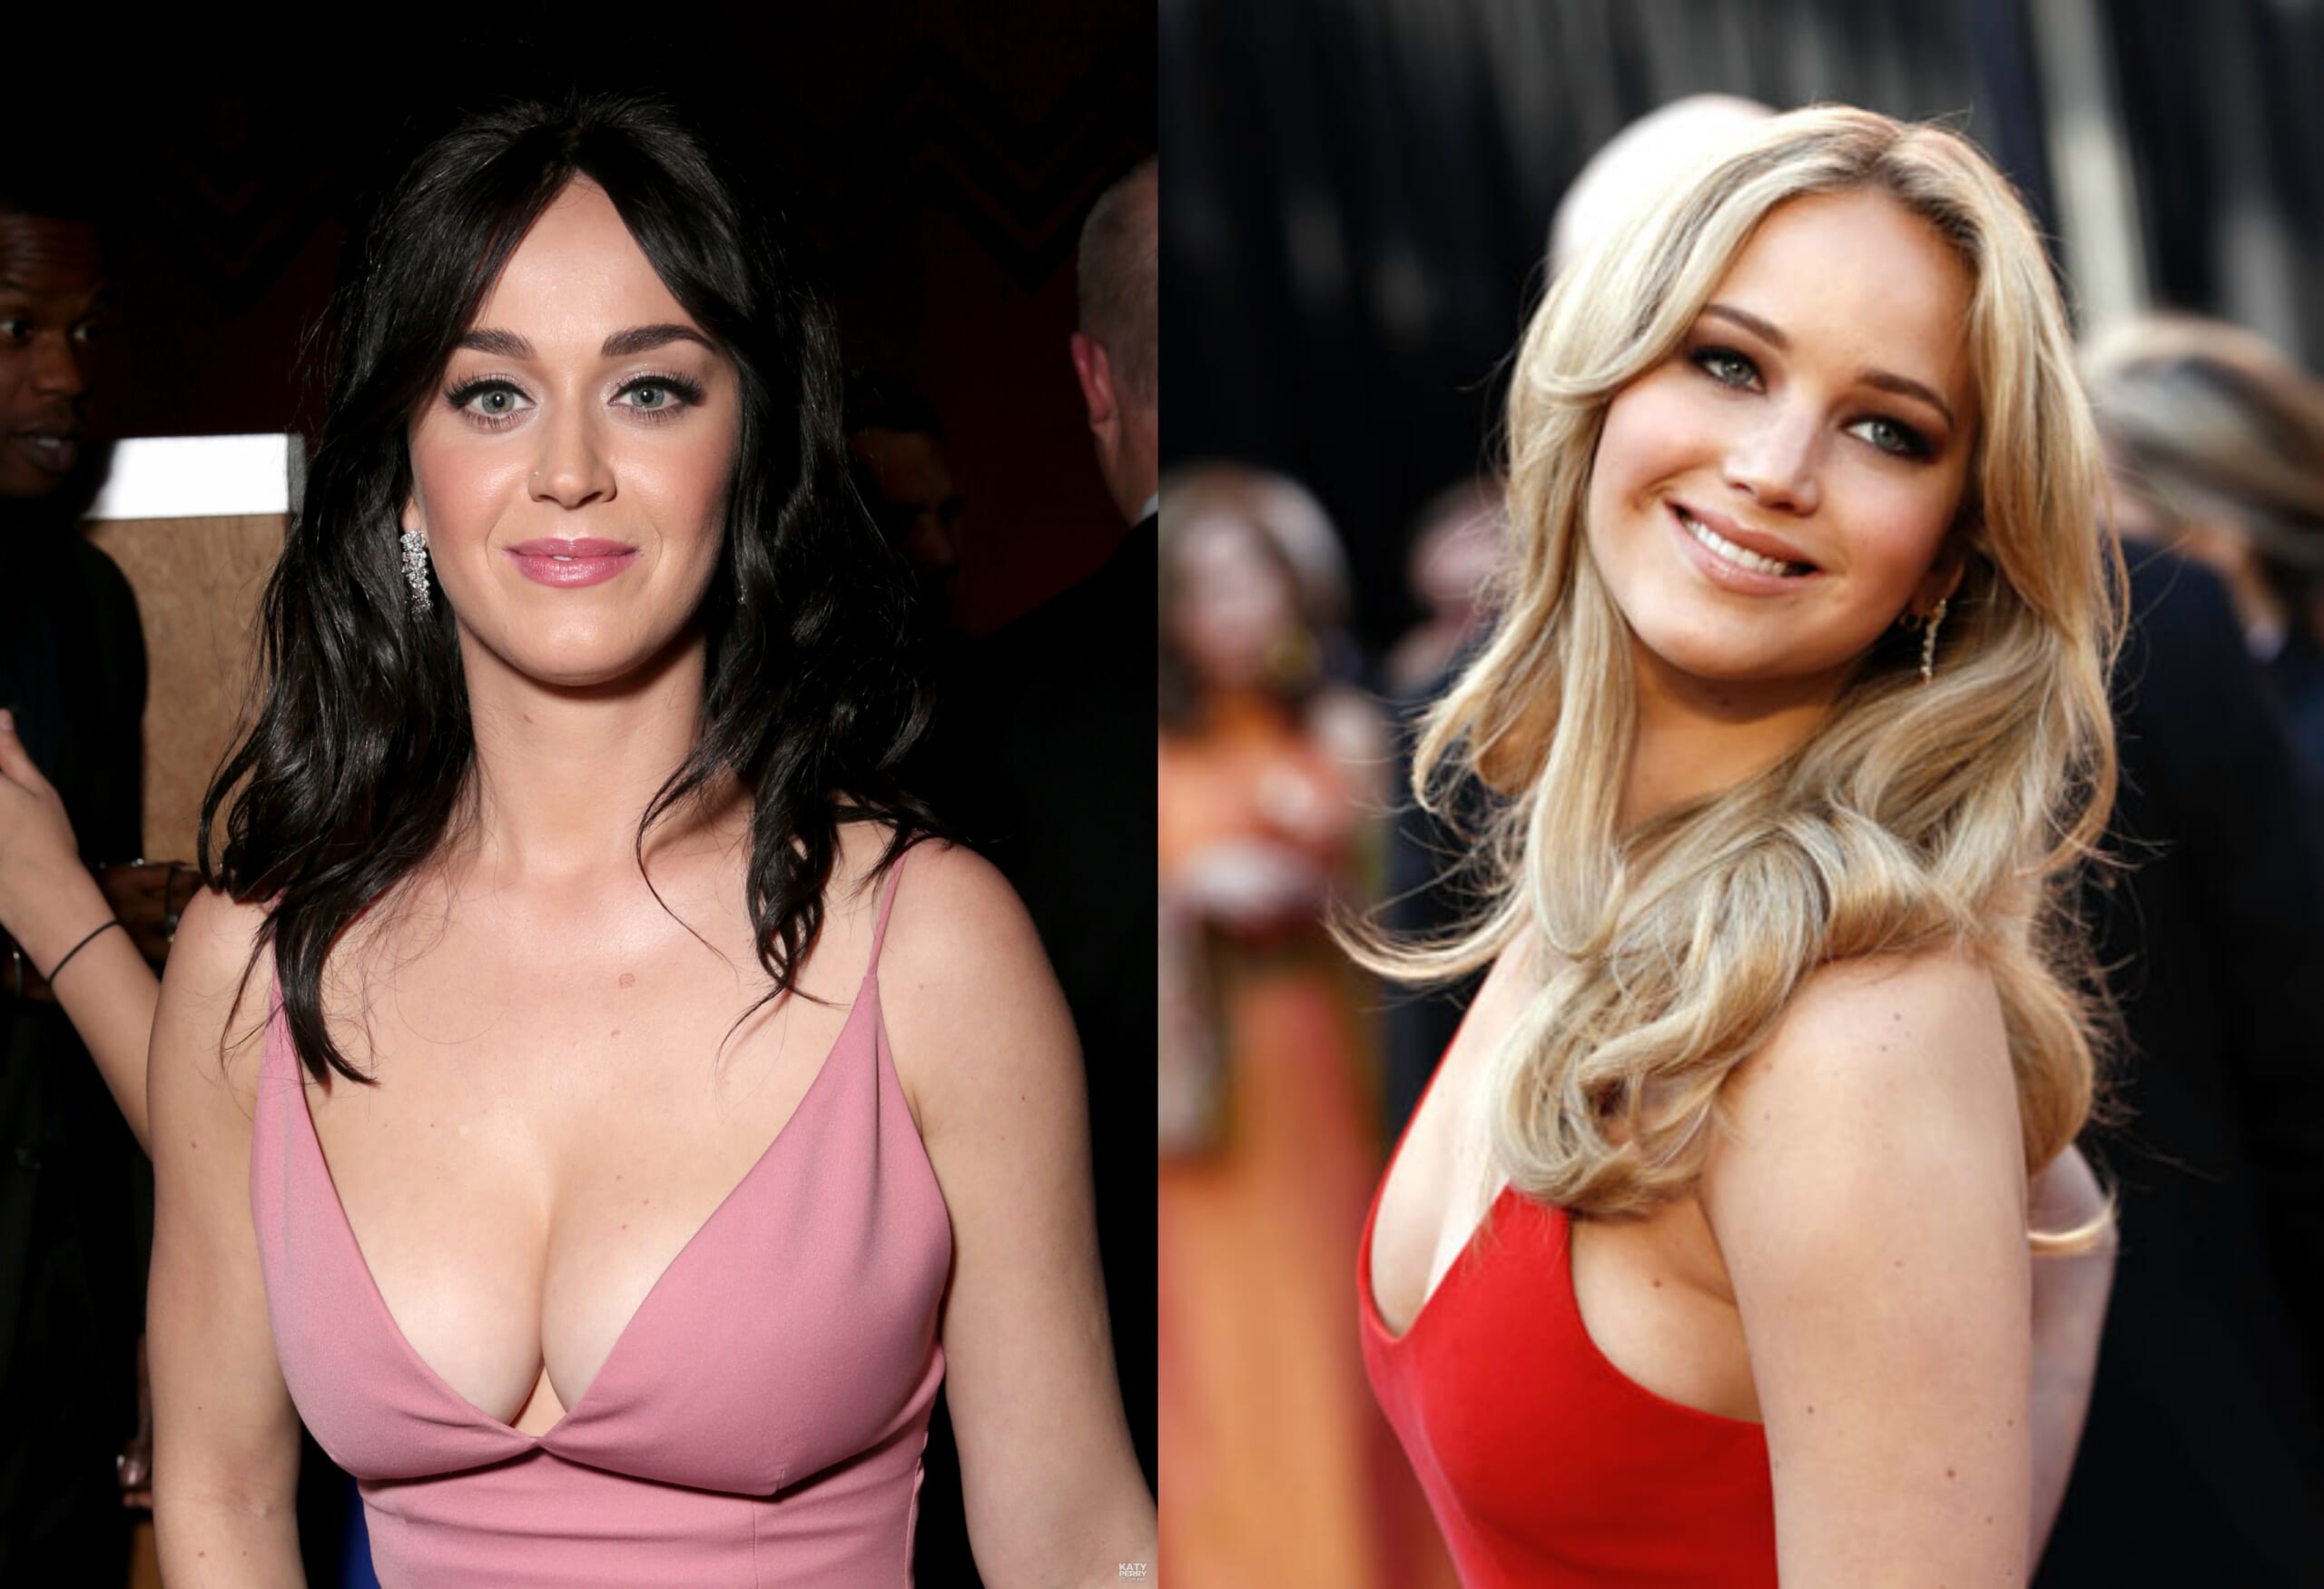 Beautiful Breasts: How Do You Know What They Look Like?